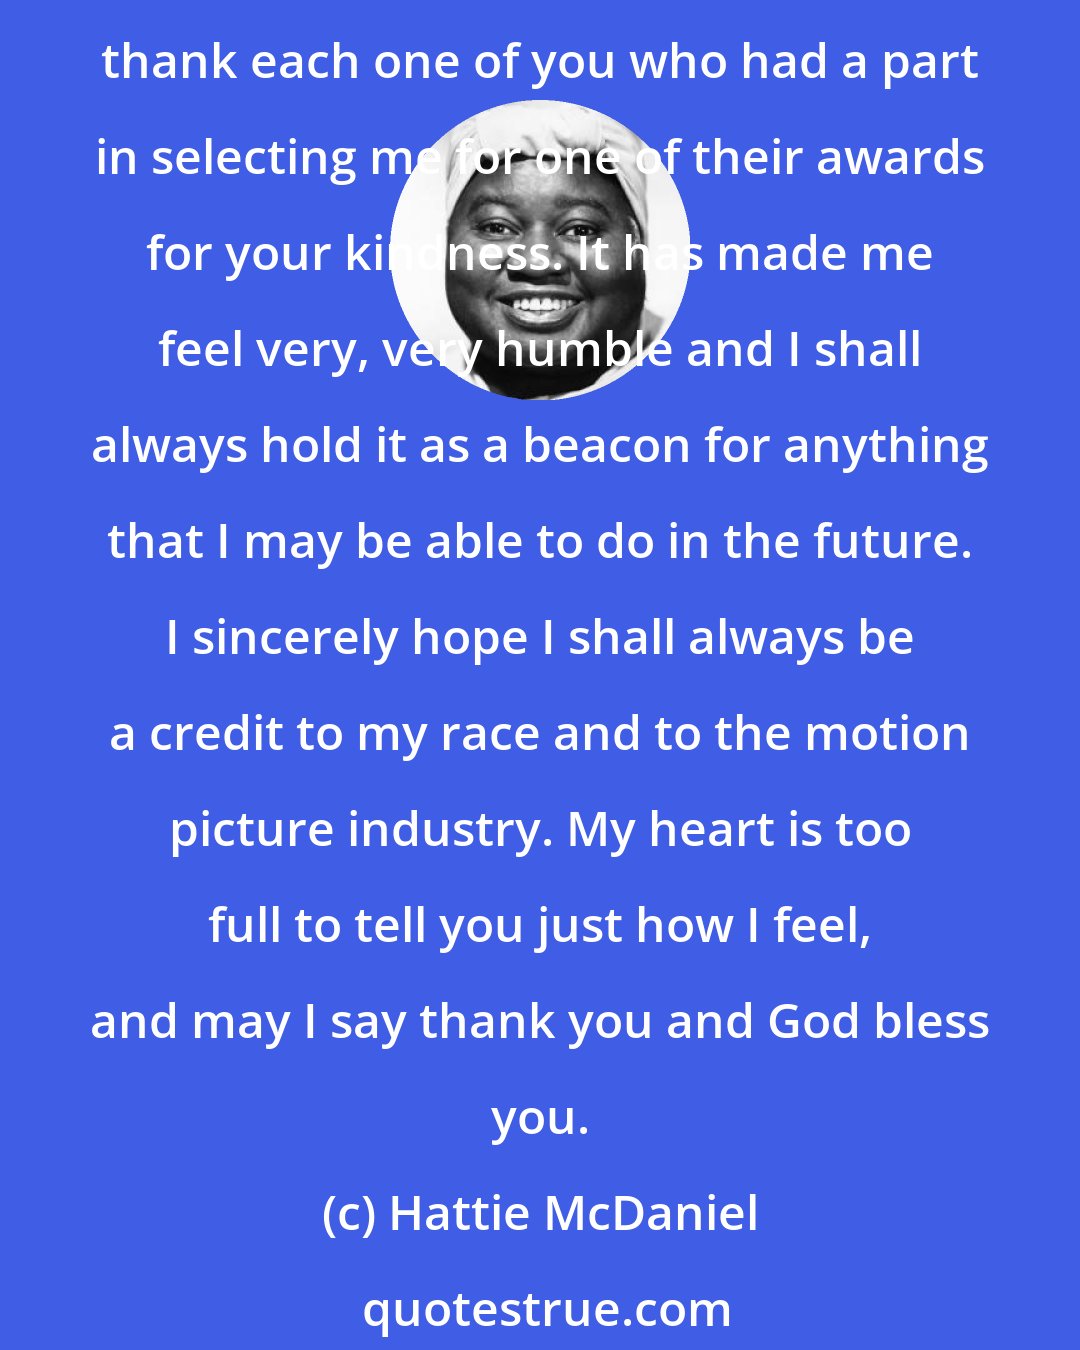 Hattie McDaniel: Academy of Motion Picture Arts and Sciences, fellow members of the motion picture industry and honored guests. This is one of the happiest moments of my life, and I want to thank each one of you who had a part in selecting me for one of their awards for your kindness. It has made me feel very, very humble and I shall always hold it as a beacon for anything that I may be able to do in the future. I sincerely hope I shall always be a credit to my race and to the motion picture industry. My heart is too full to tell you just how I feel, and may I say thank you and God bless you.